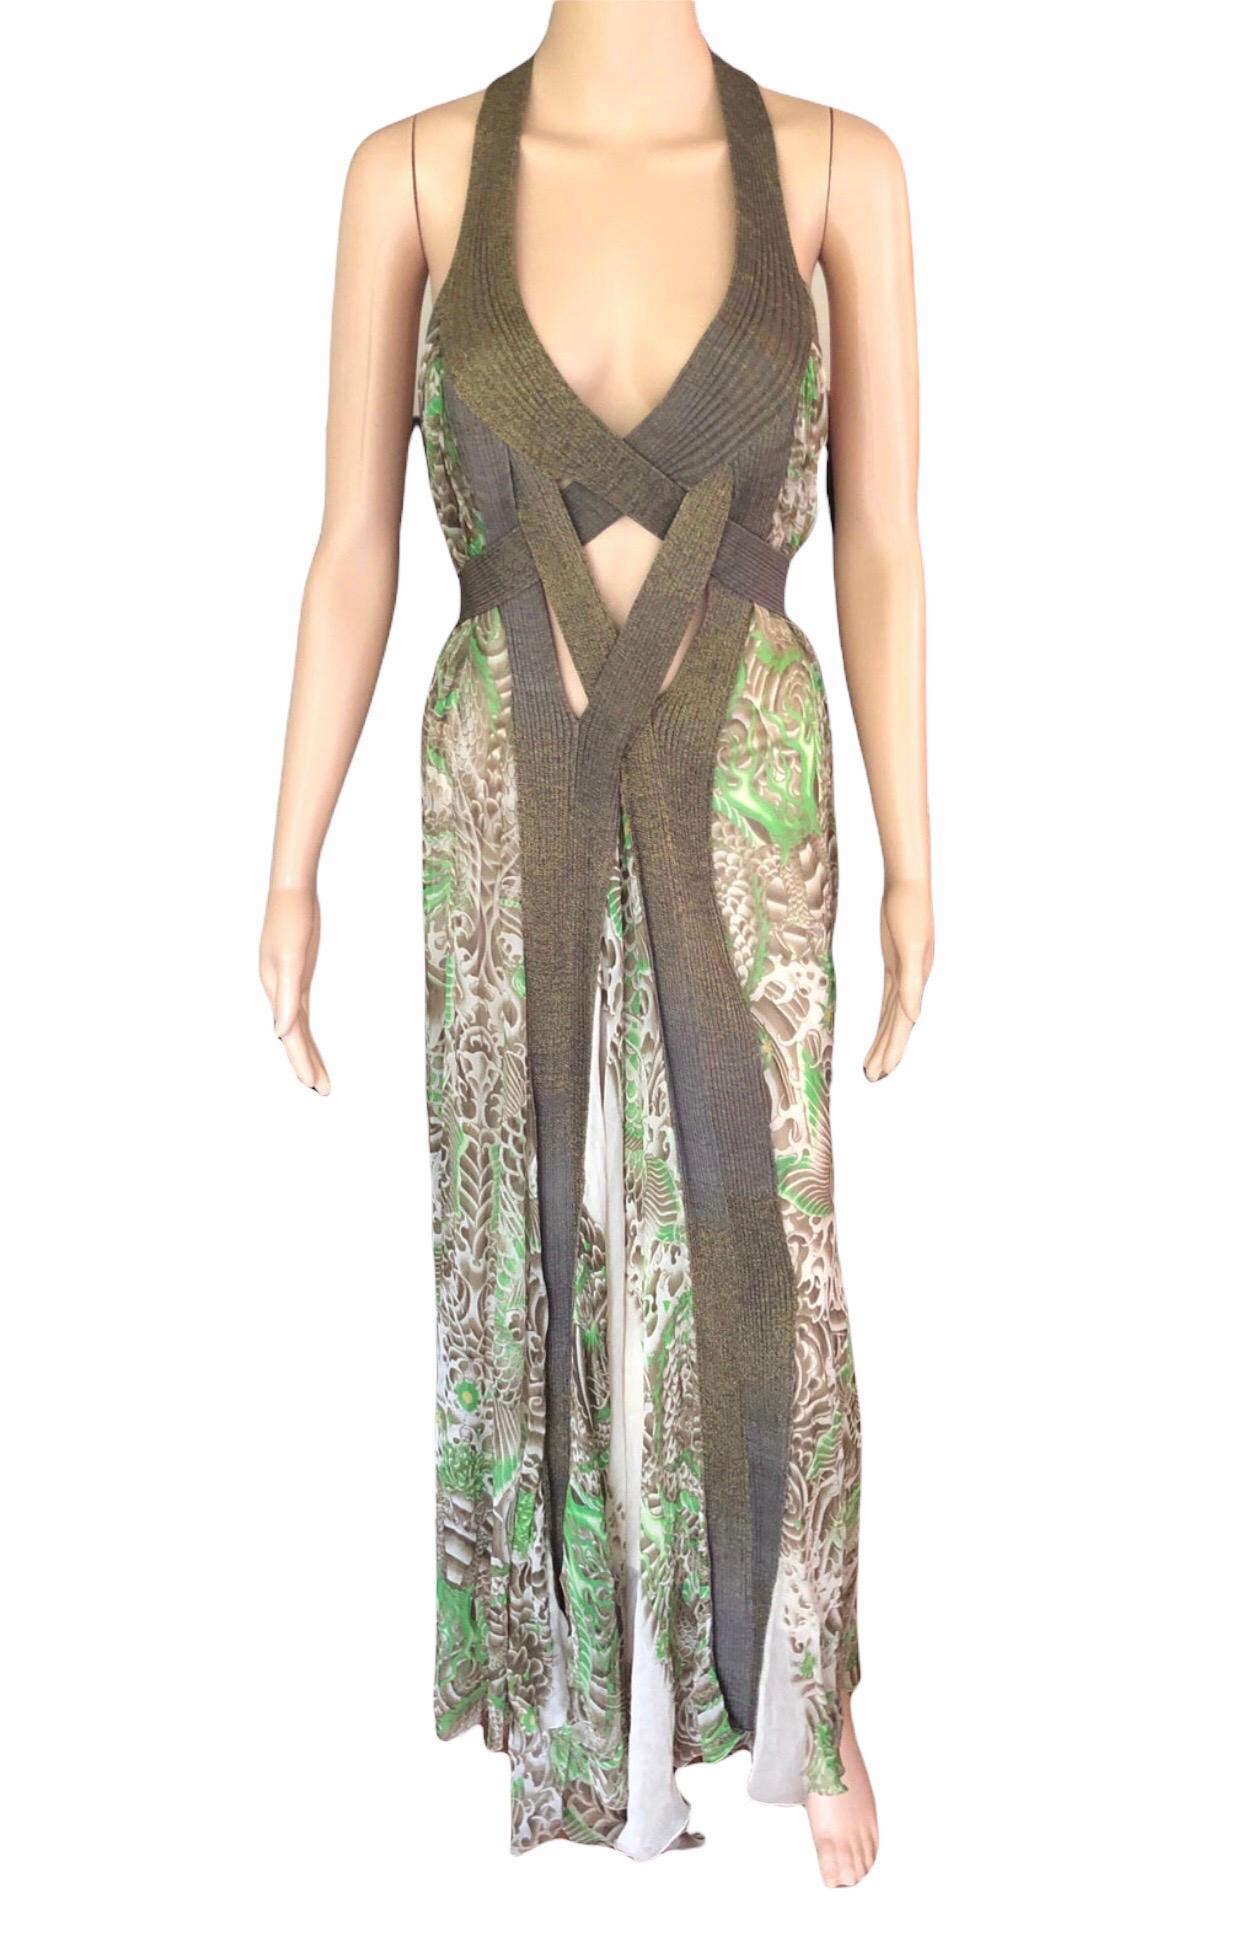 Jean Paul Gaultier S/S 2009 Runway Plunging Neckline Cutout Open Back Maxi Dress In Excellent Condition For Sale In Naples, FL